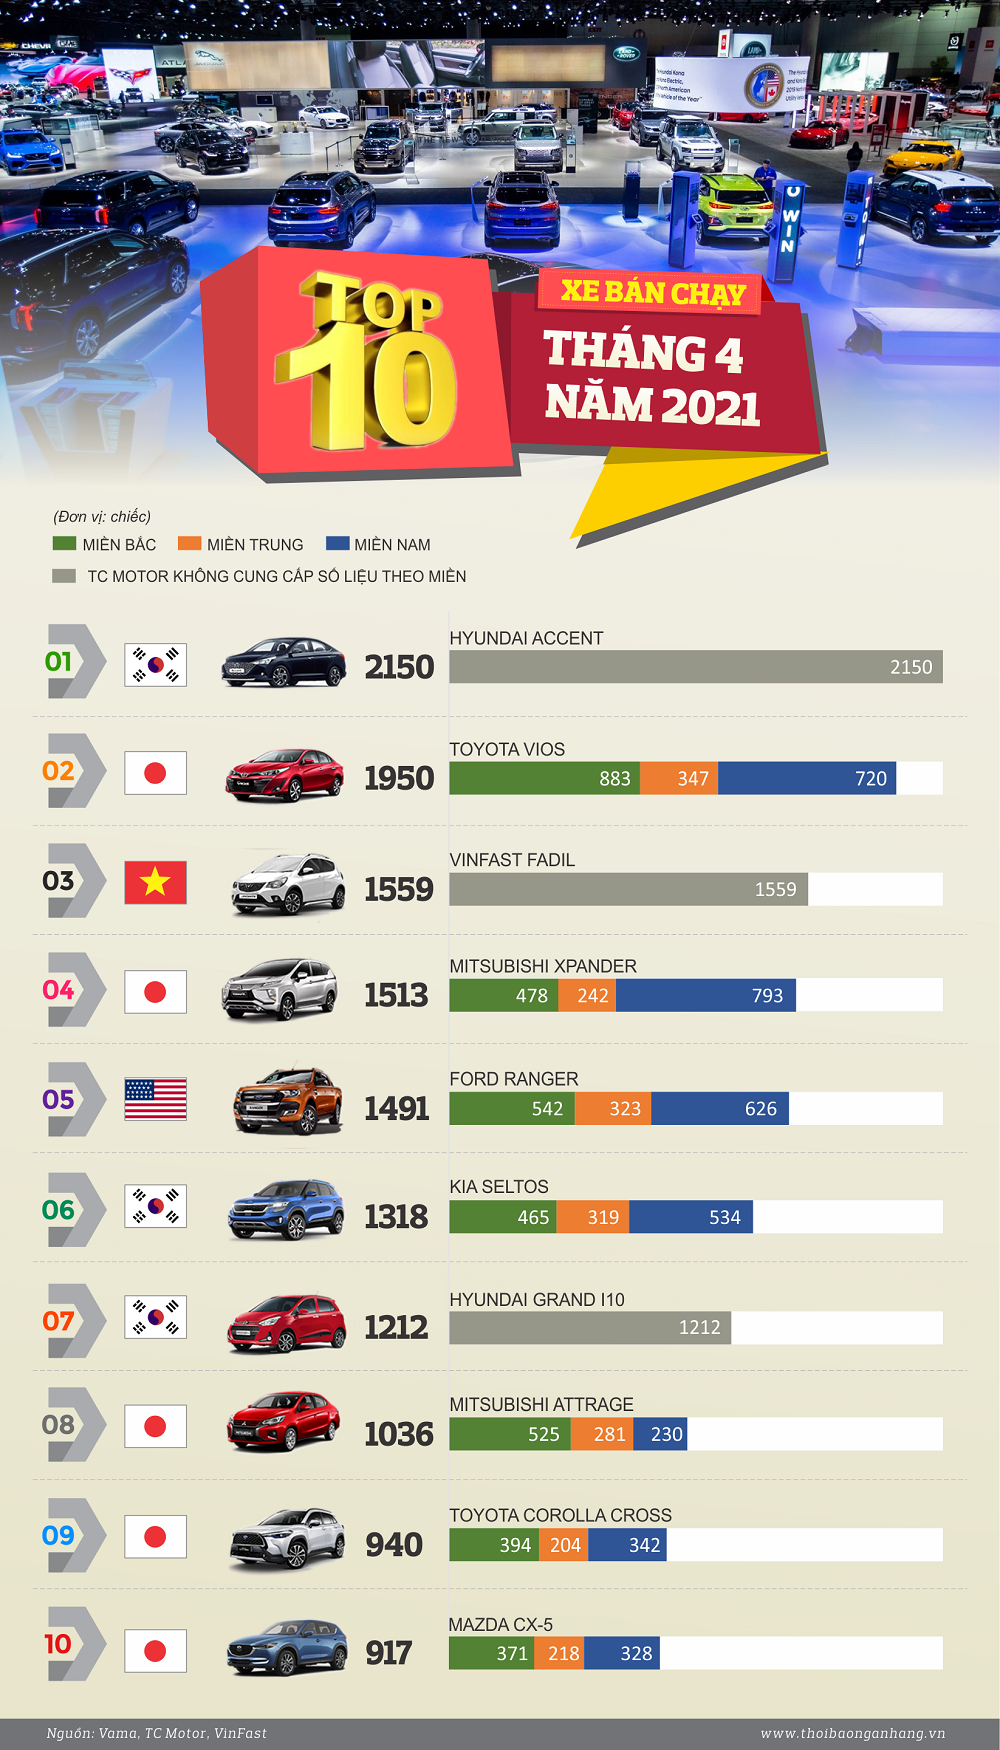 infographic top 10 xe ban chay thang 42021